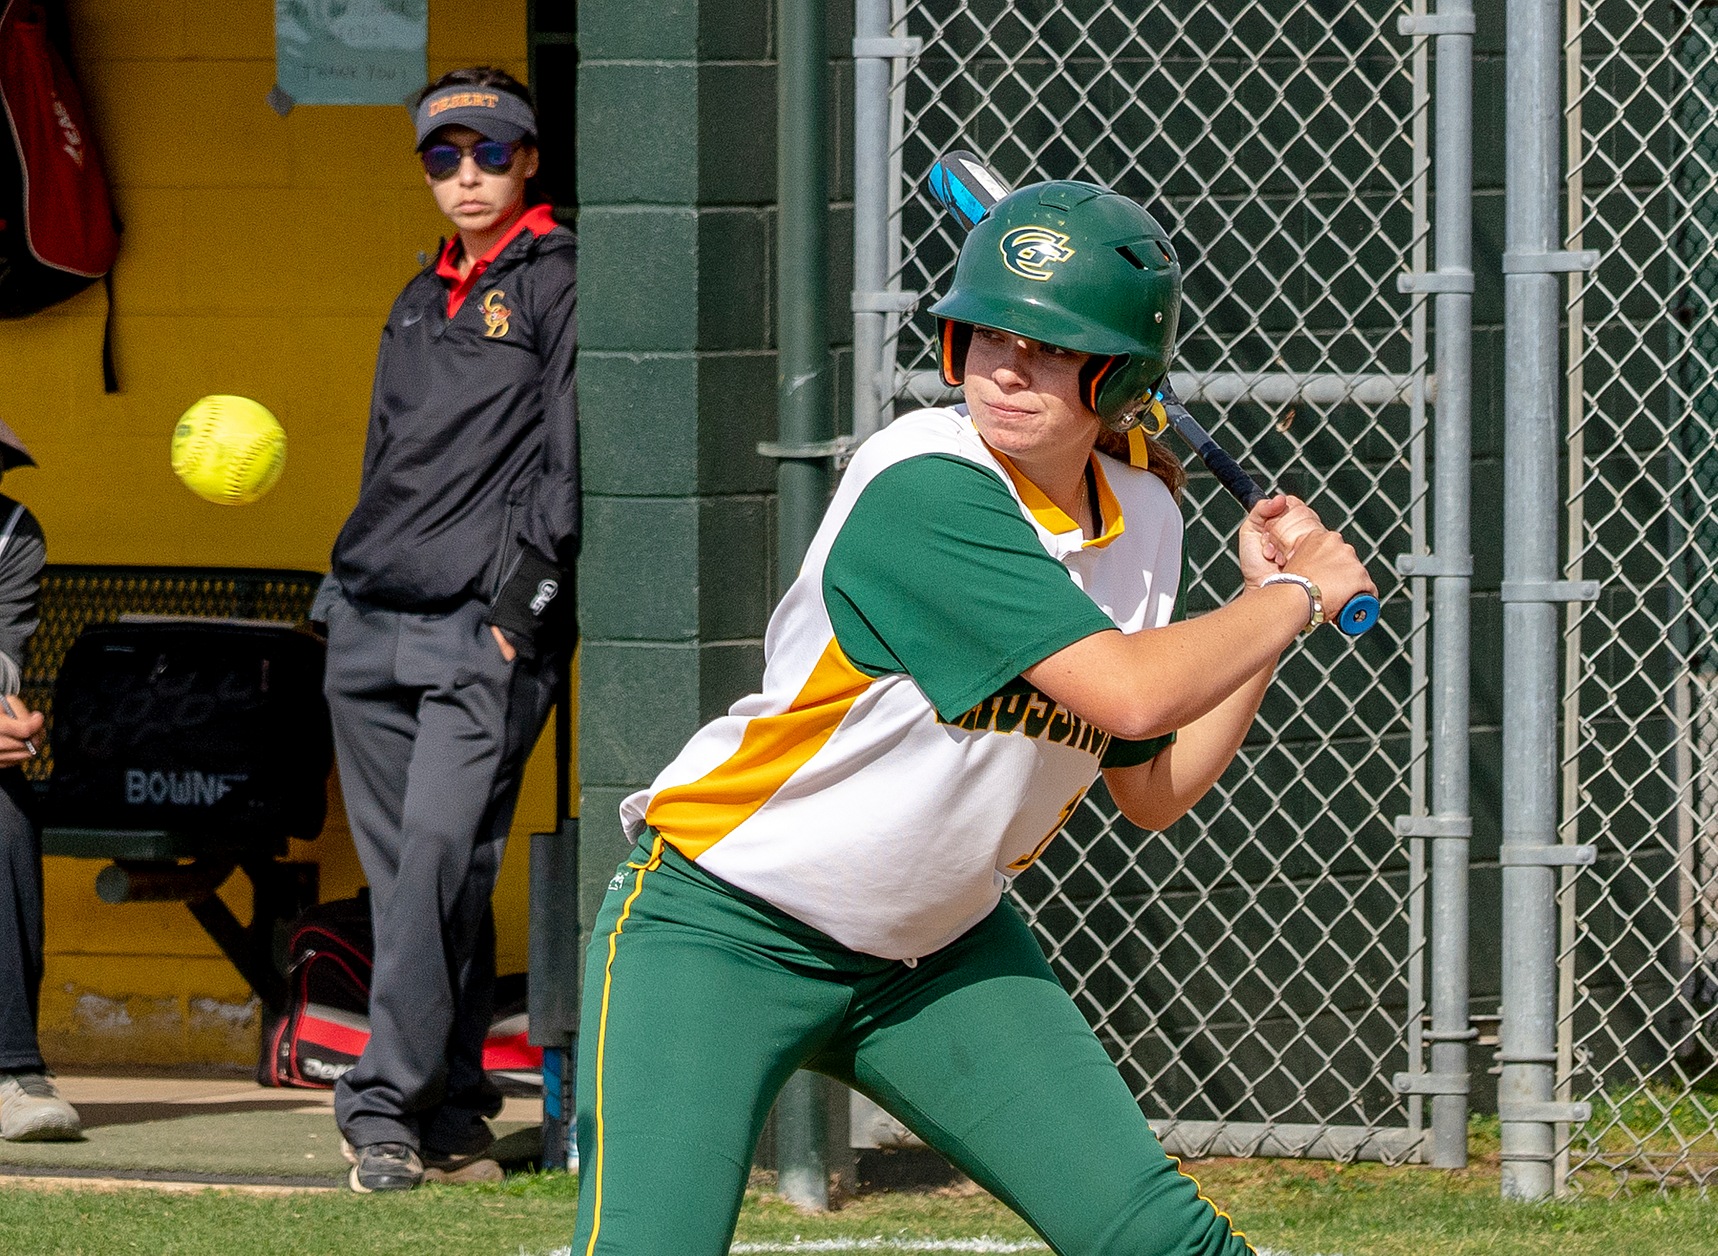 GRIFFINS SWEEP BARSTOW IN A DOUBLE HEADER